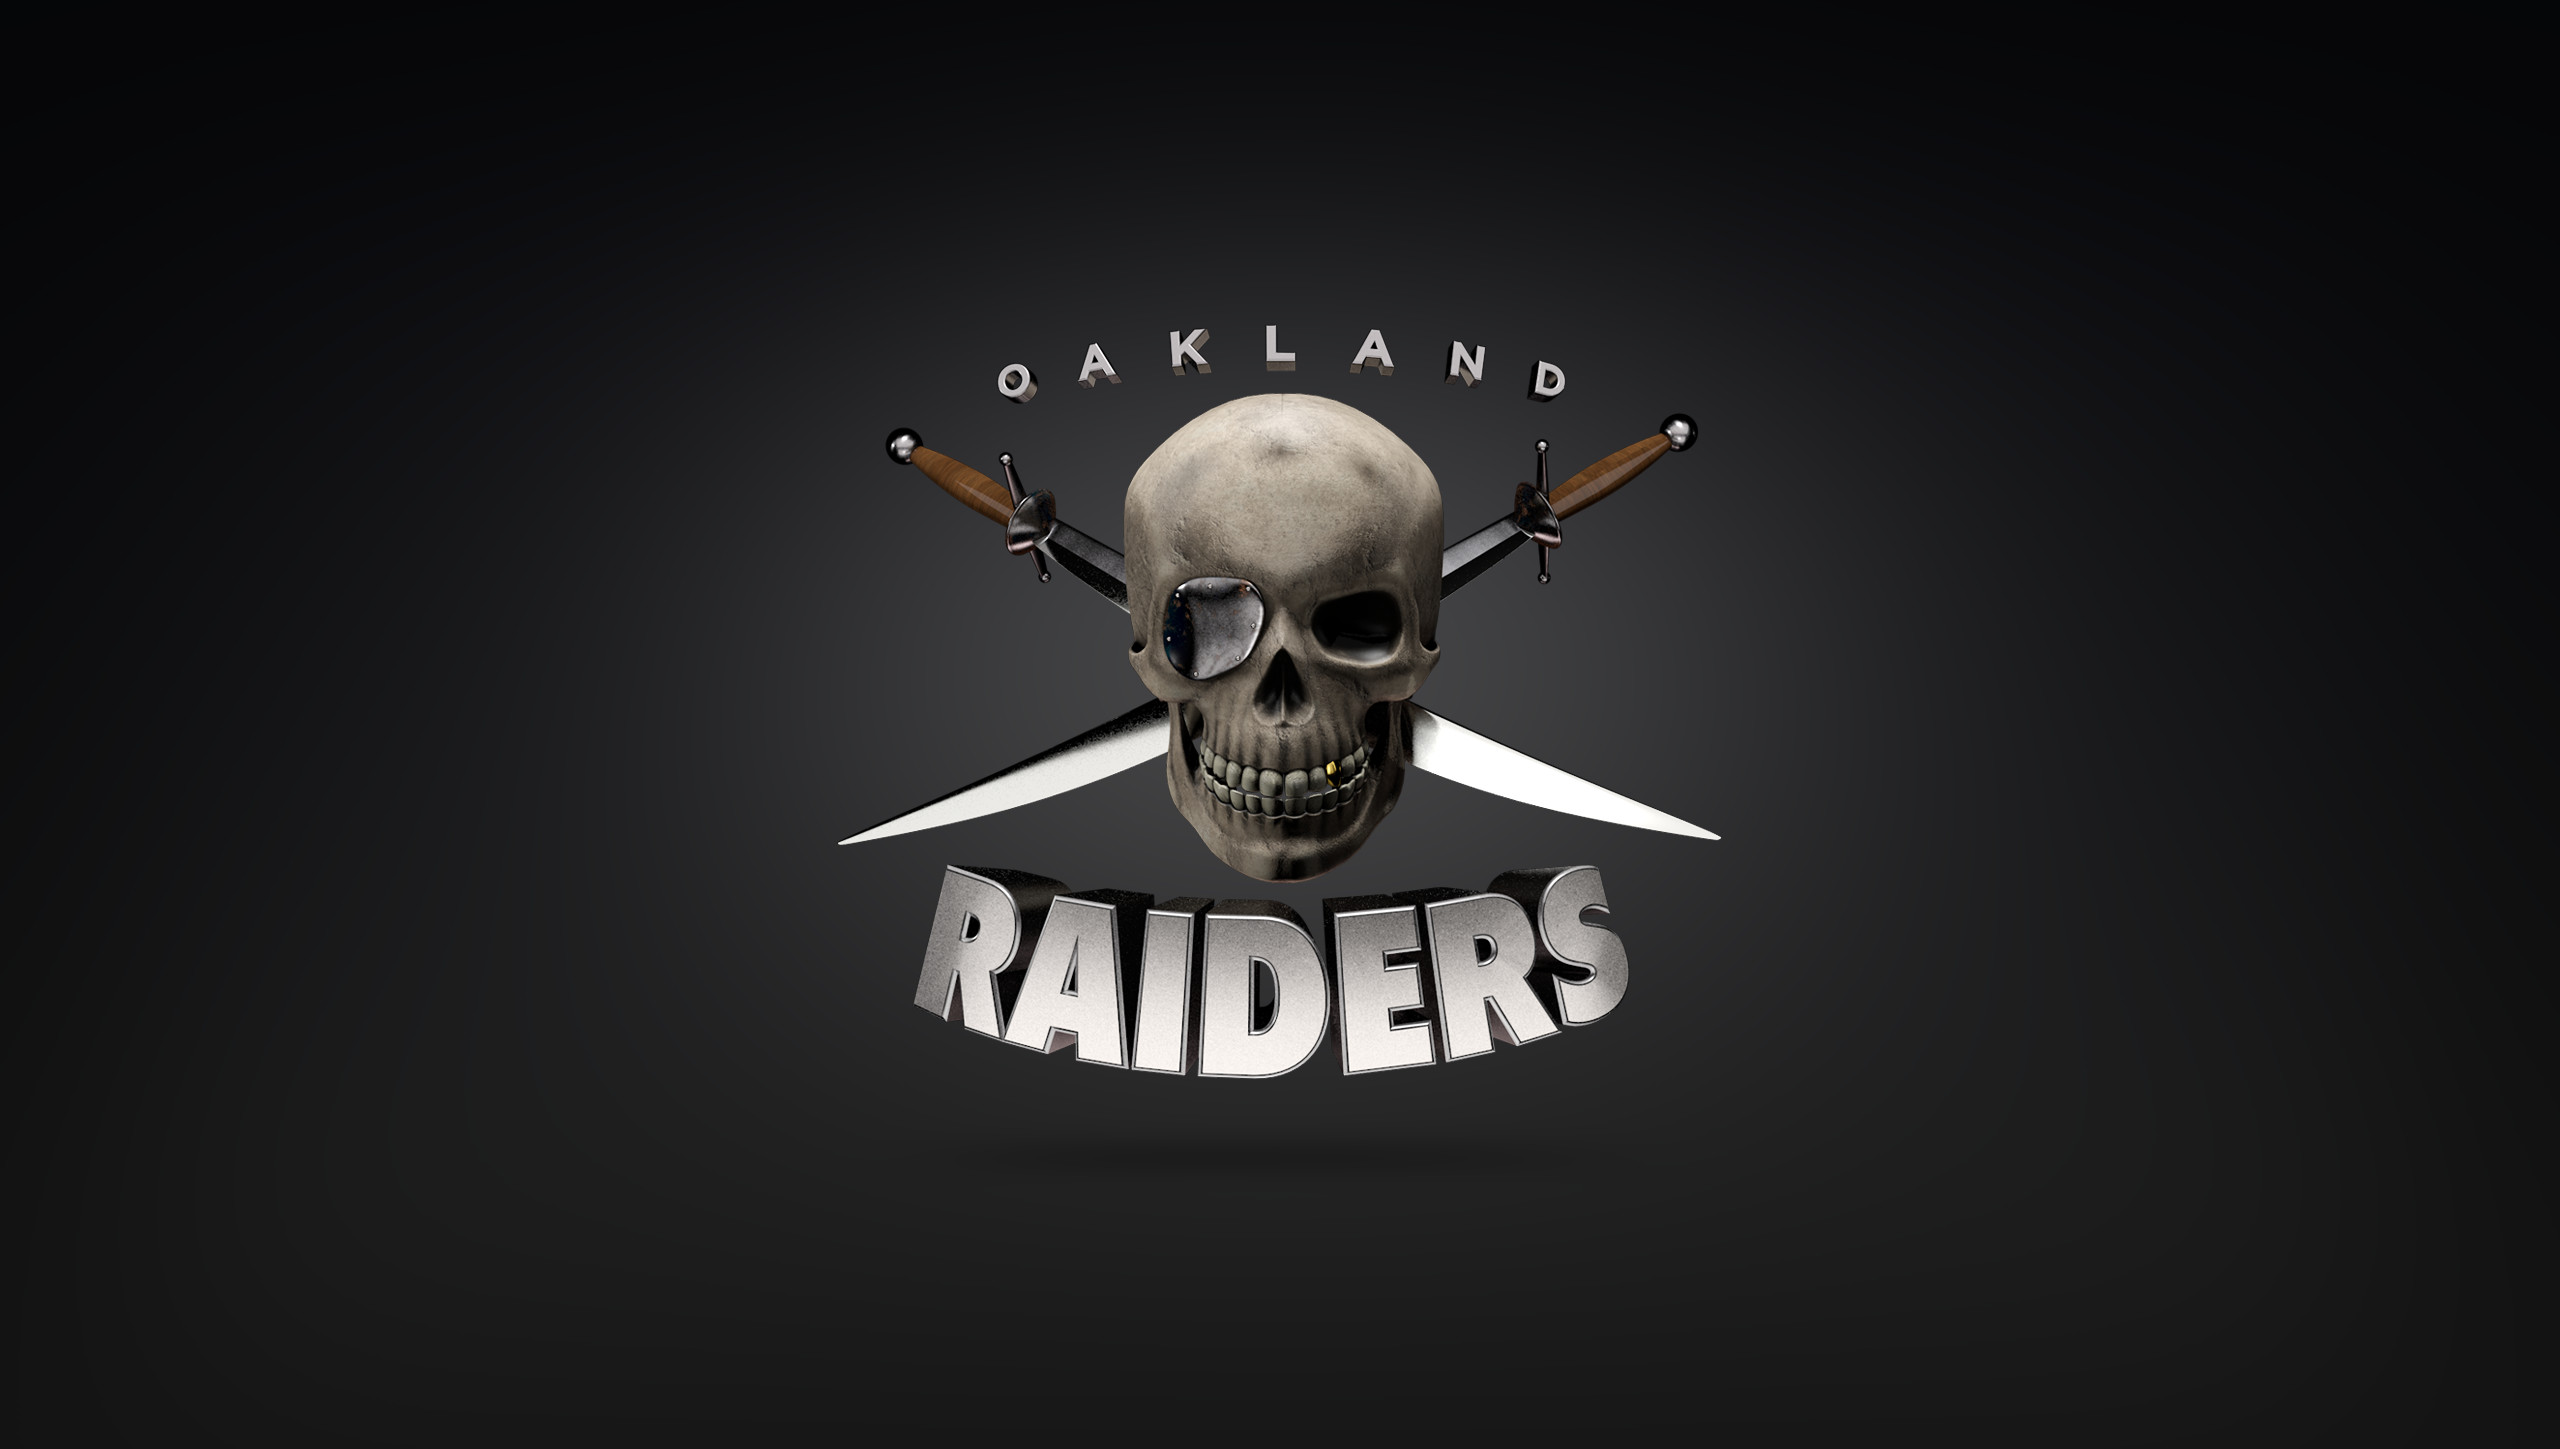 Oakland Raiders Pictures Wallpaper (60+ images)